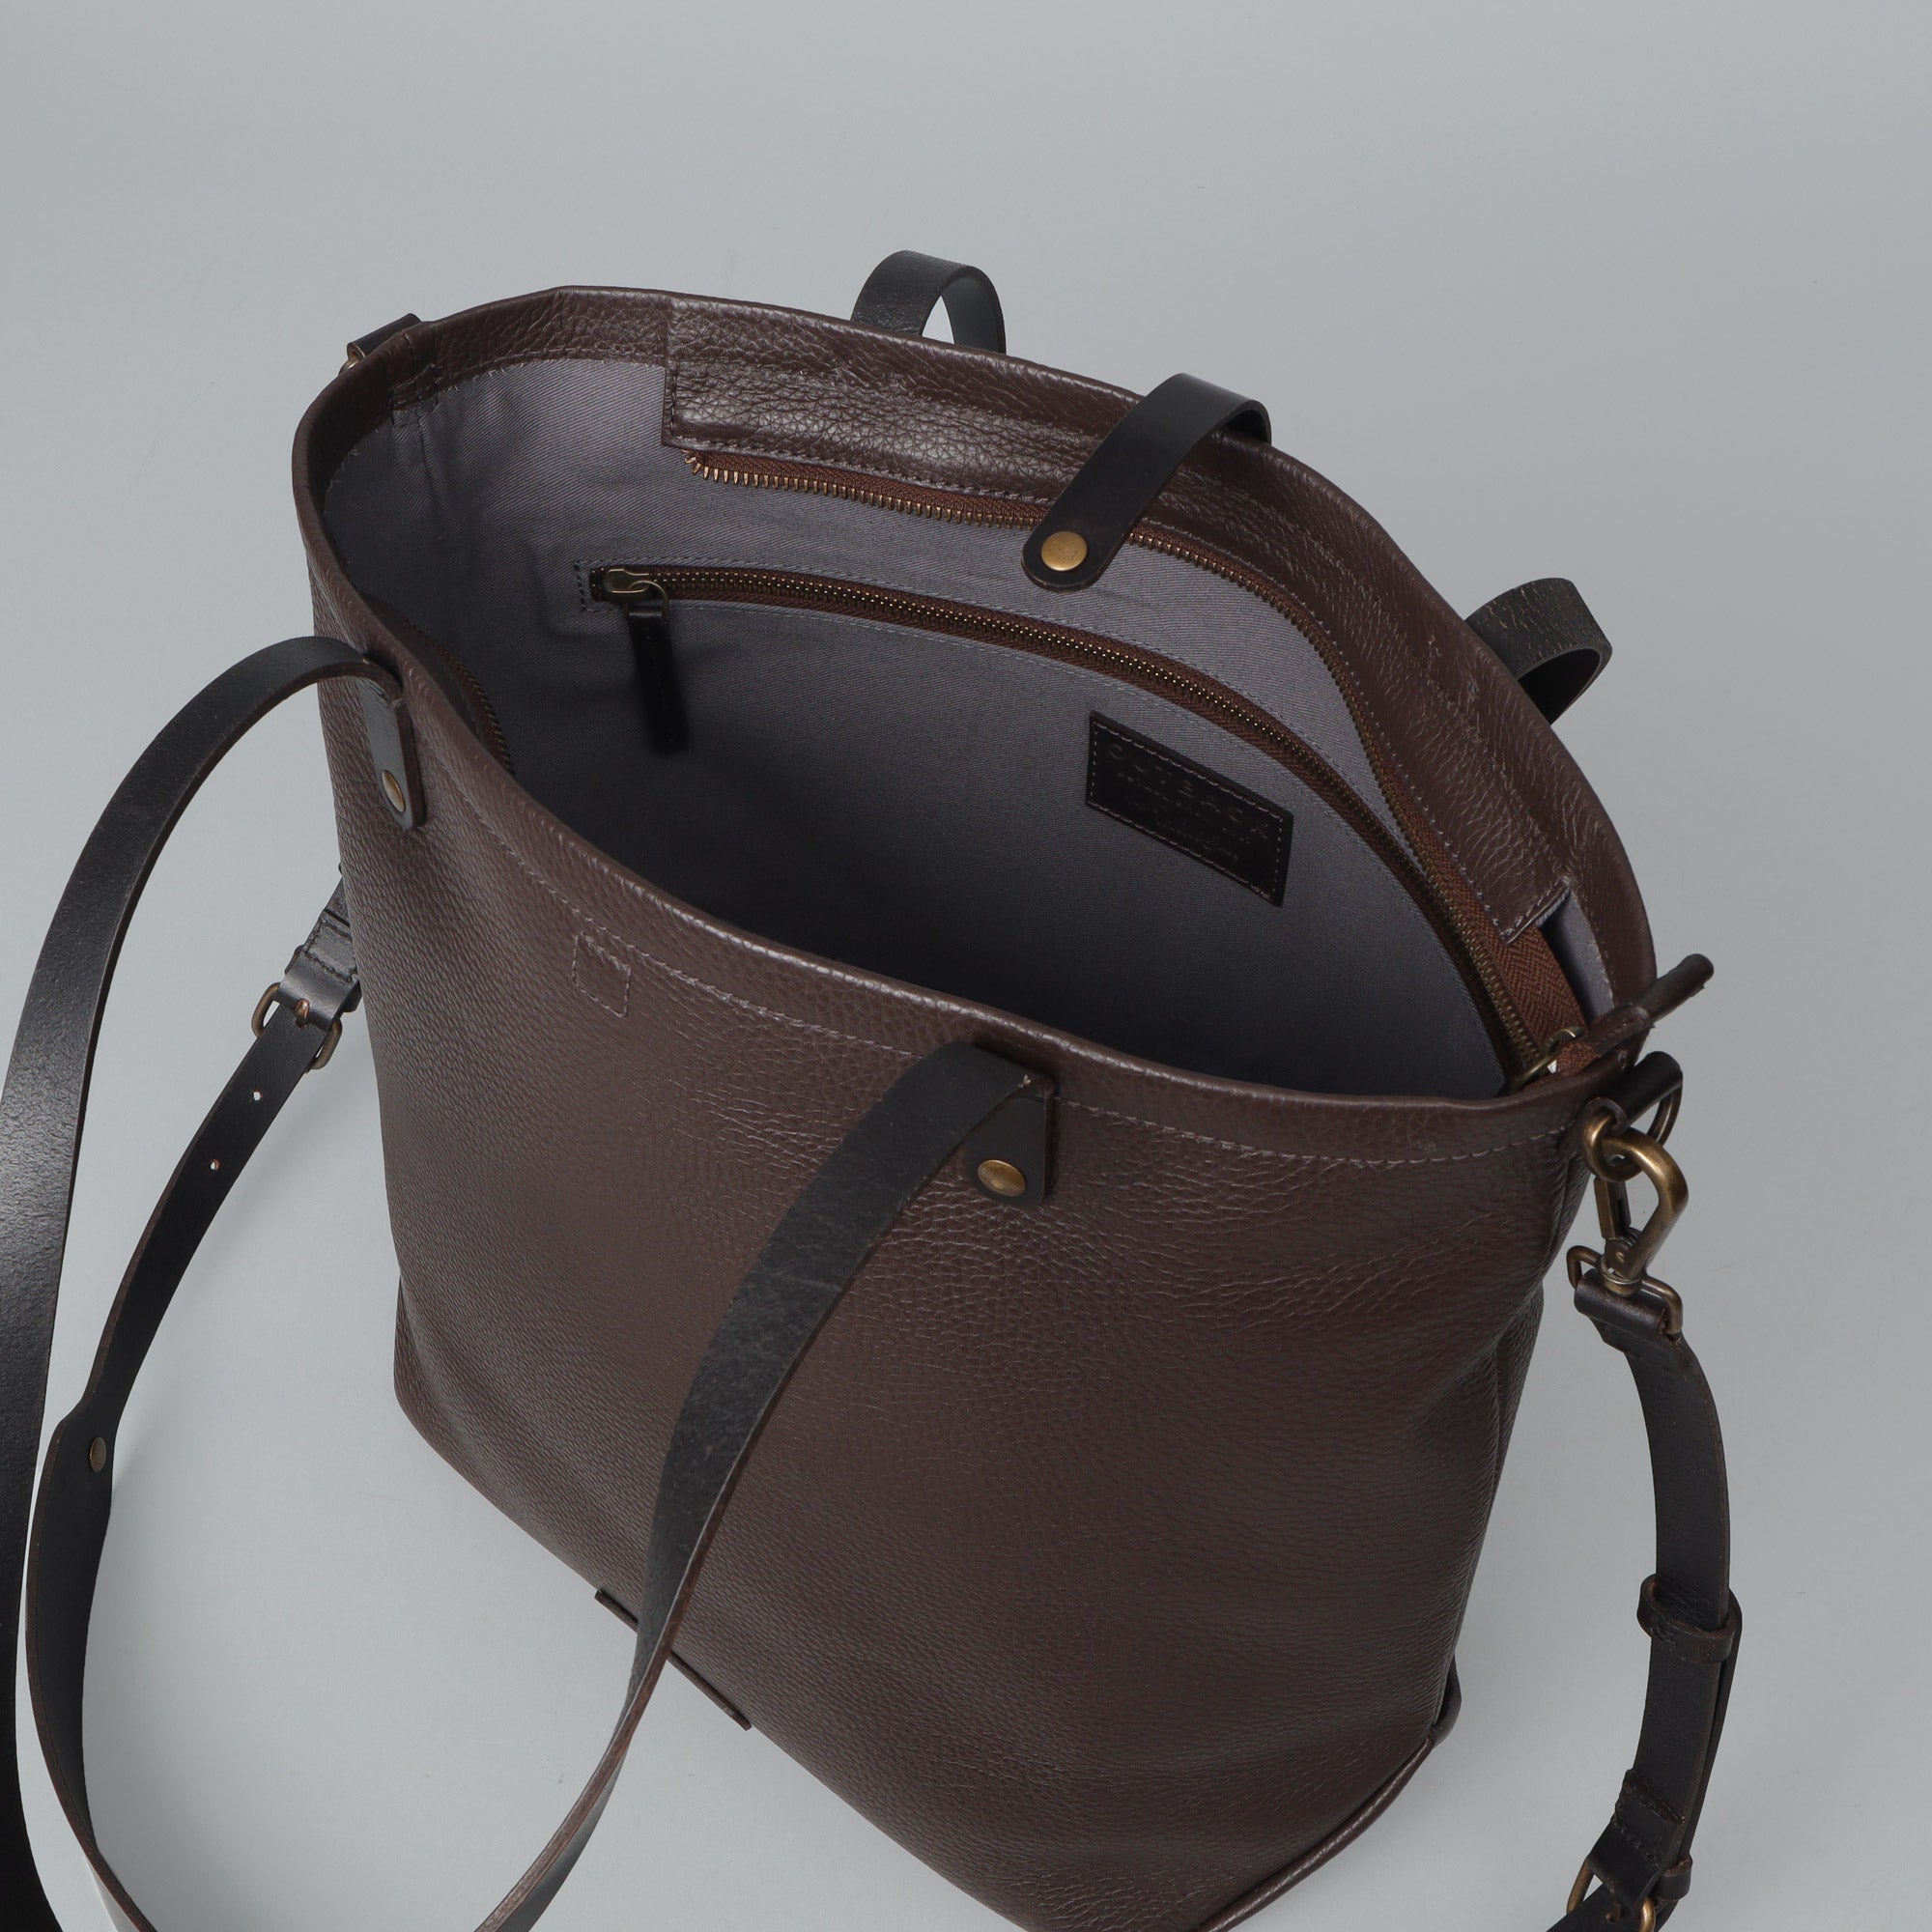 Spacious leather canvas tote